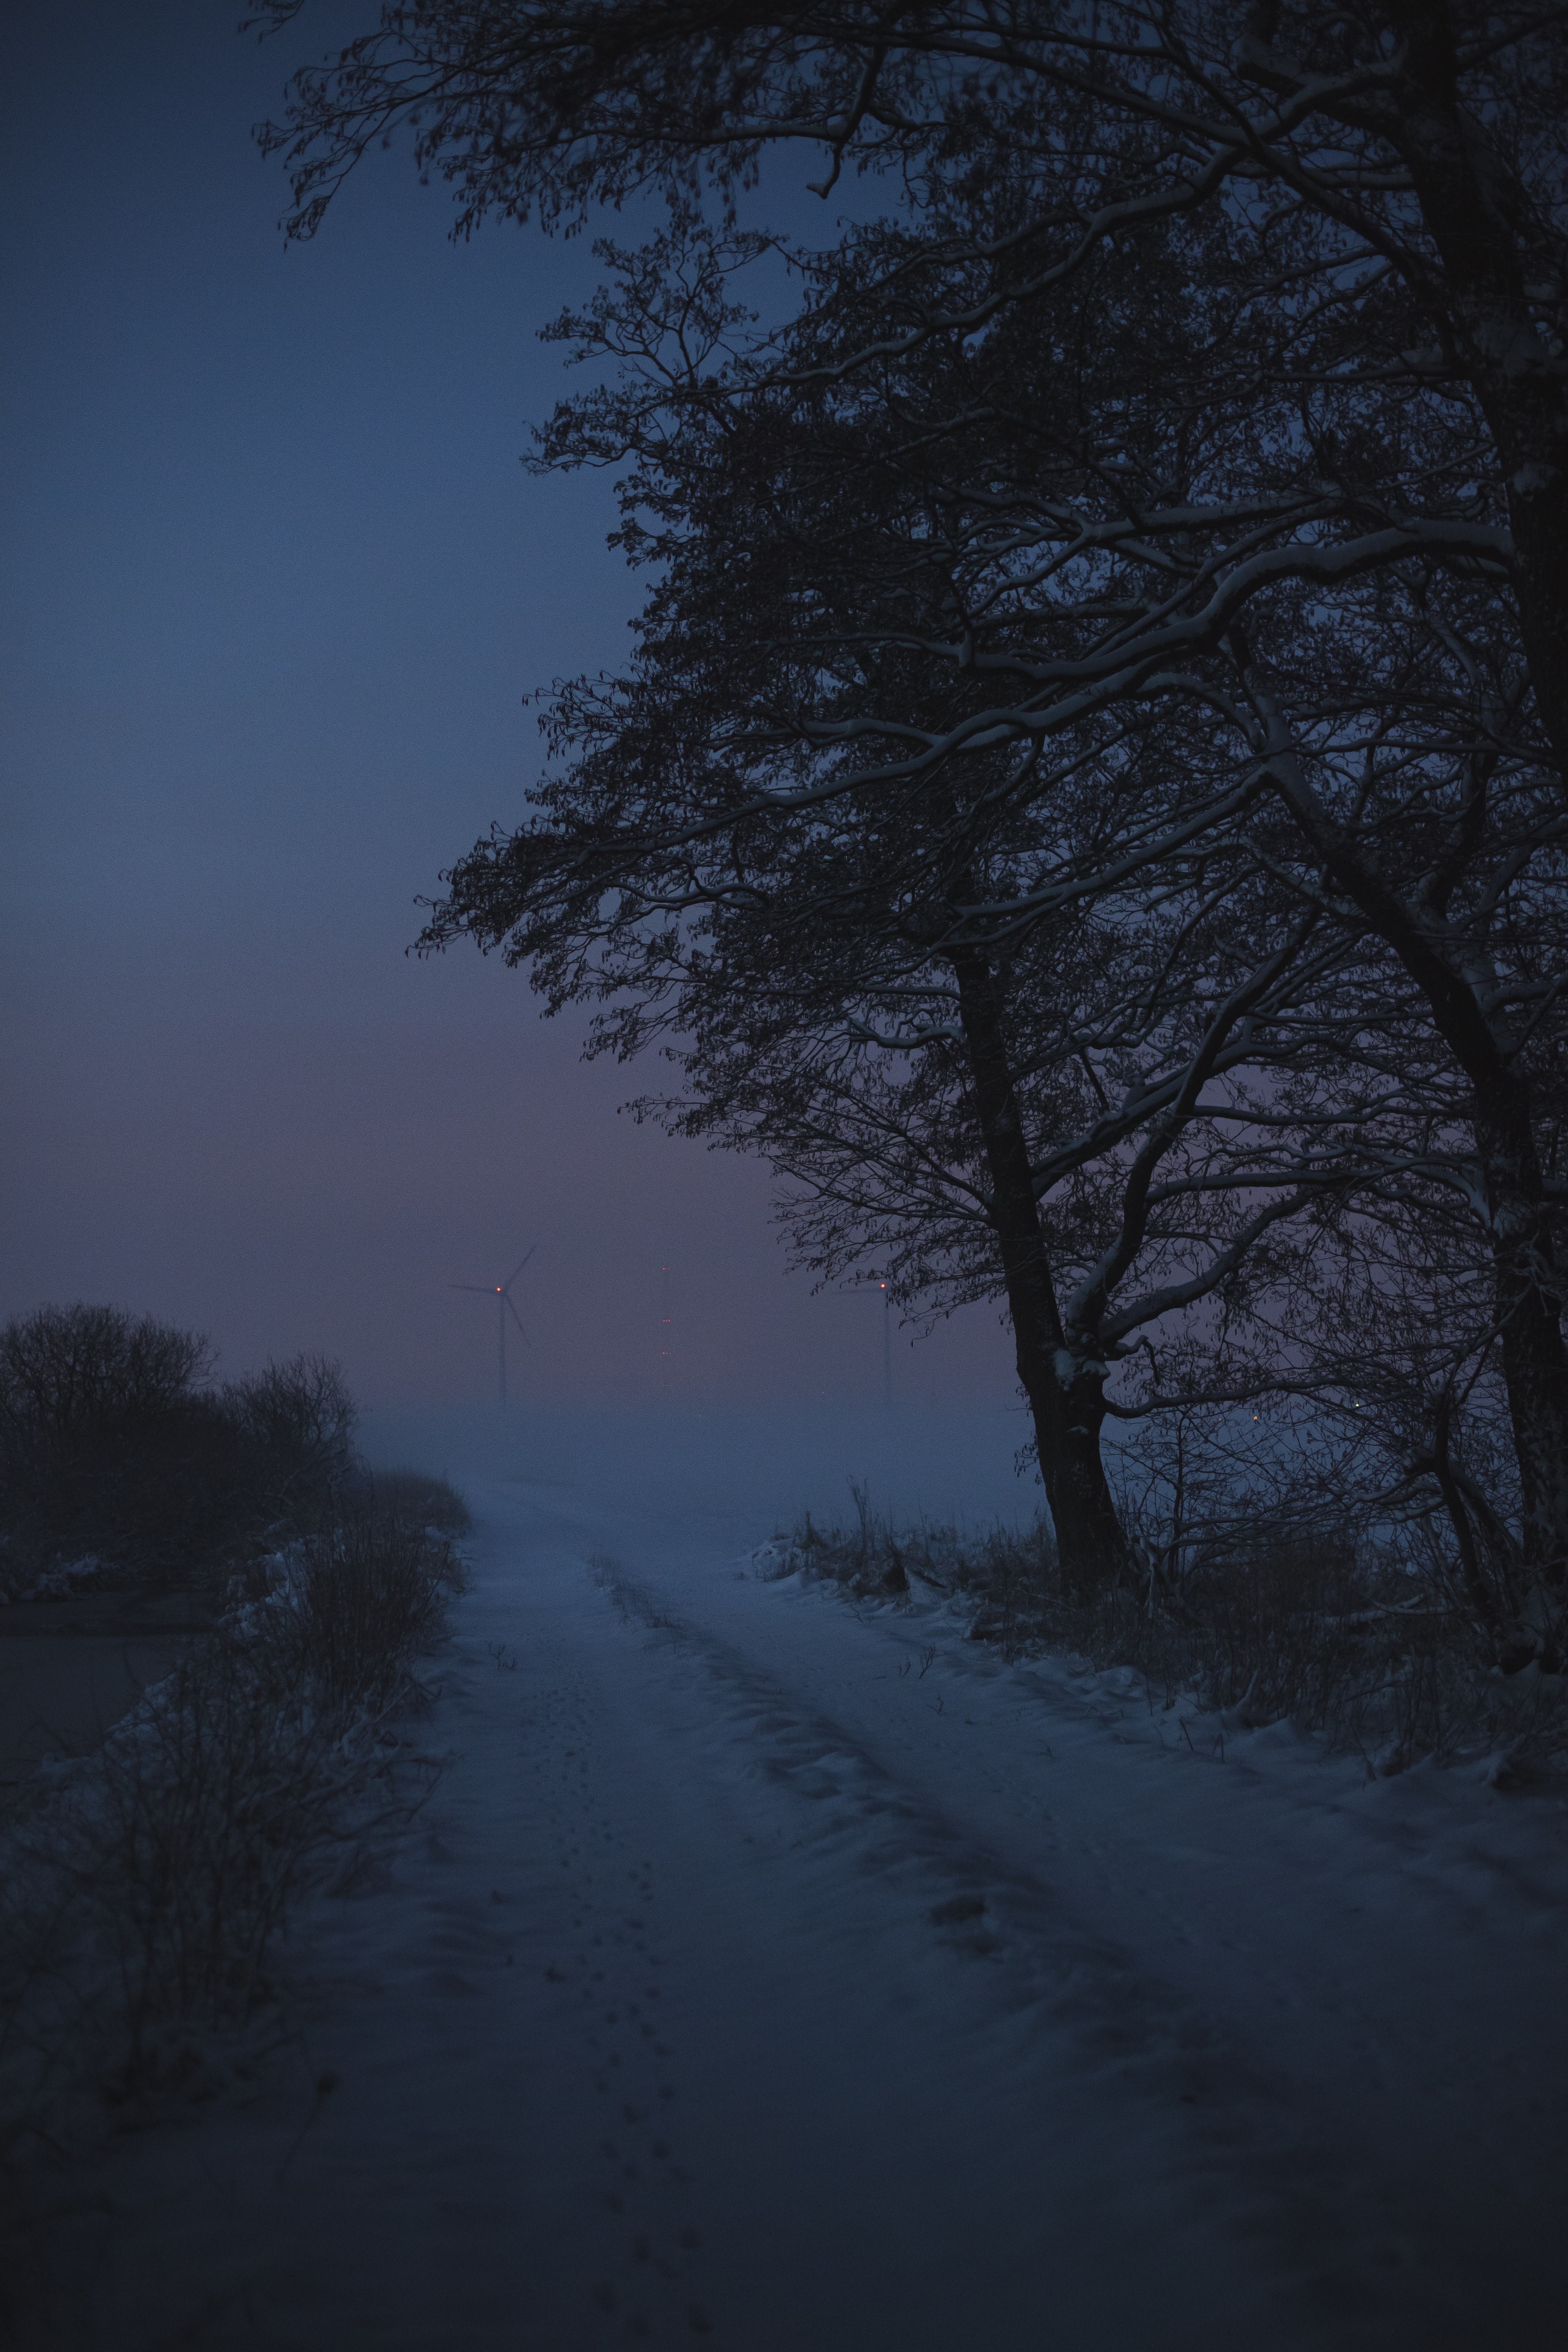 79976 1440x900 PC pictures for free, download winter, road, dusk, snow 1440x900 wallpapers on your desktop